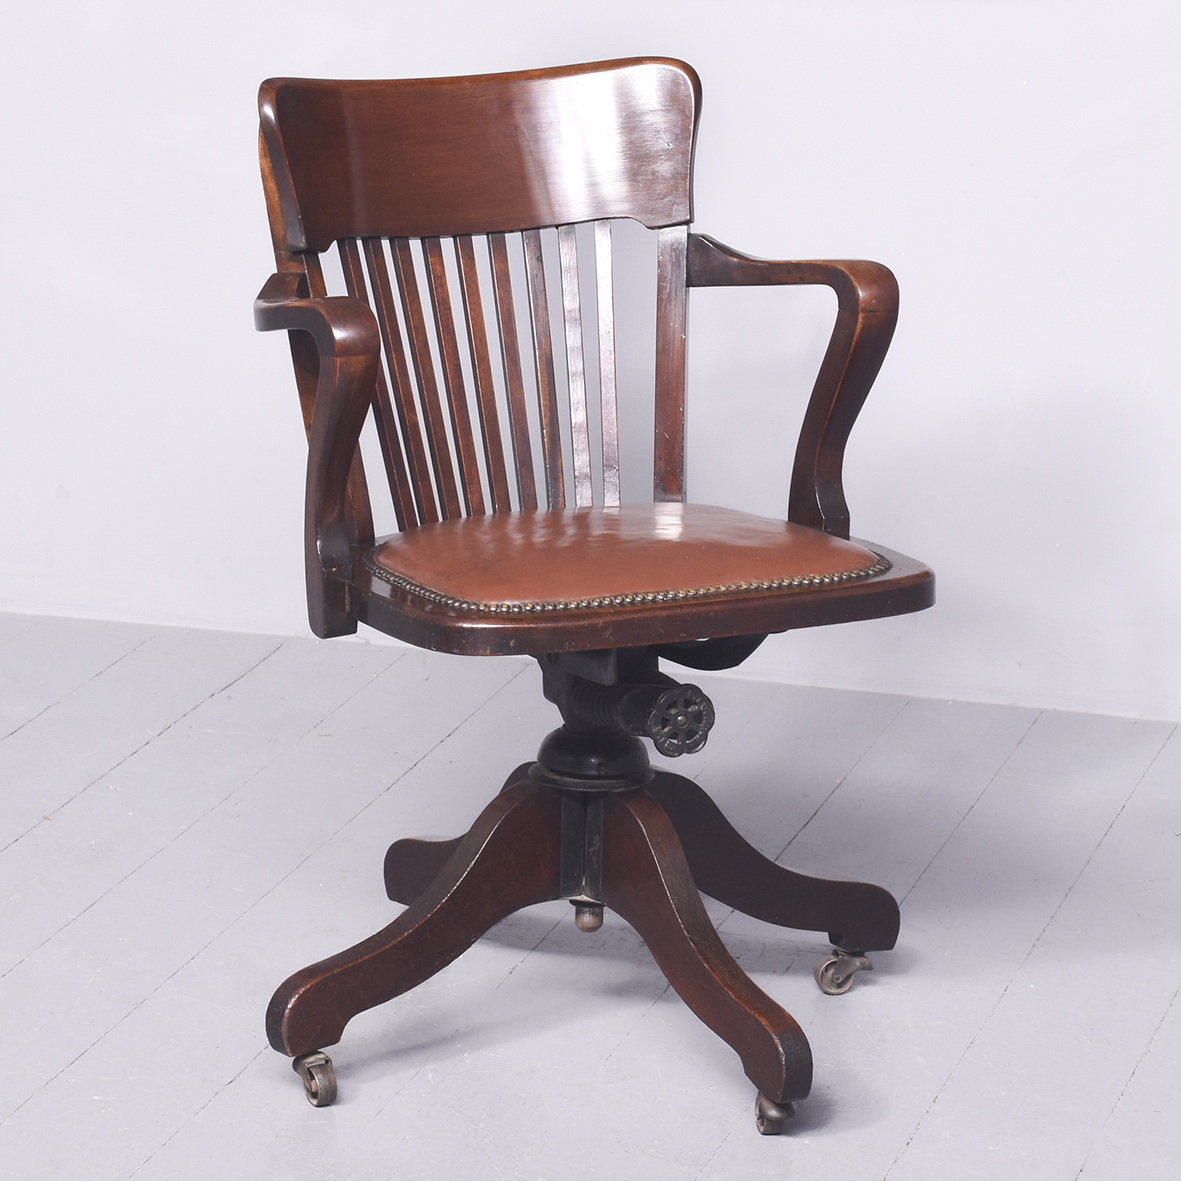 Revolving and Reclining Walnut Desk Chair Antique Chairs